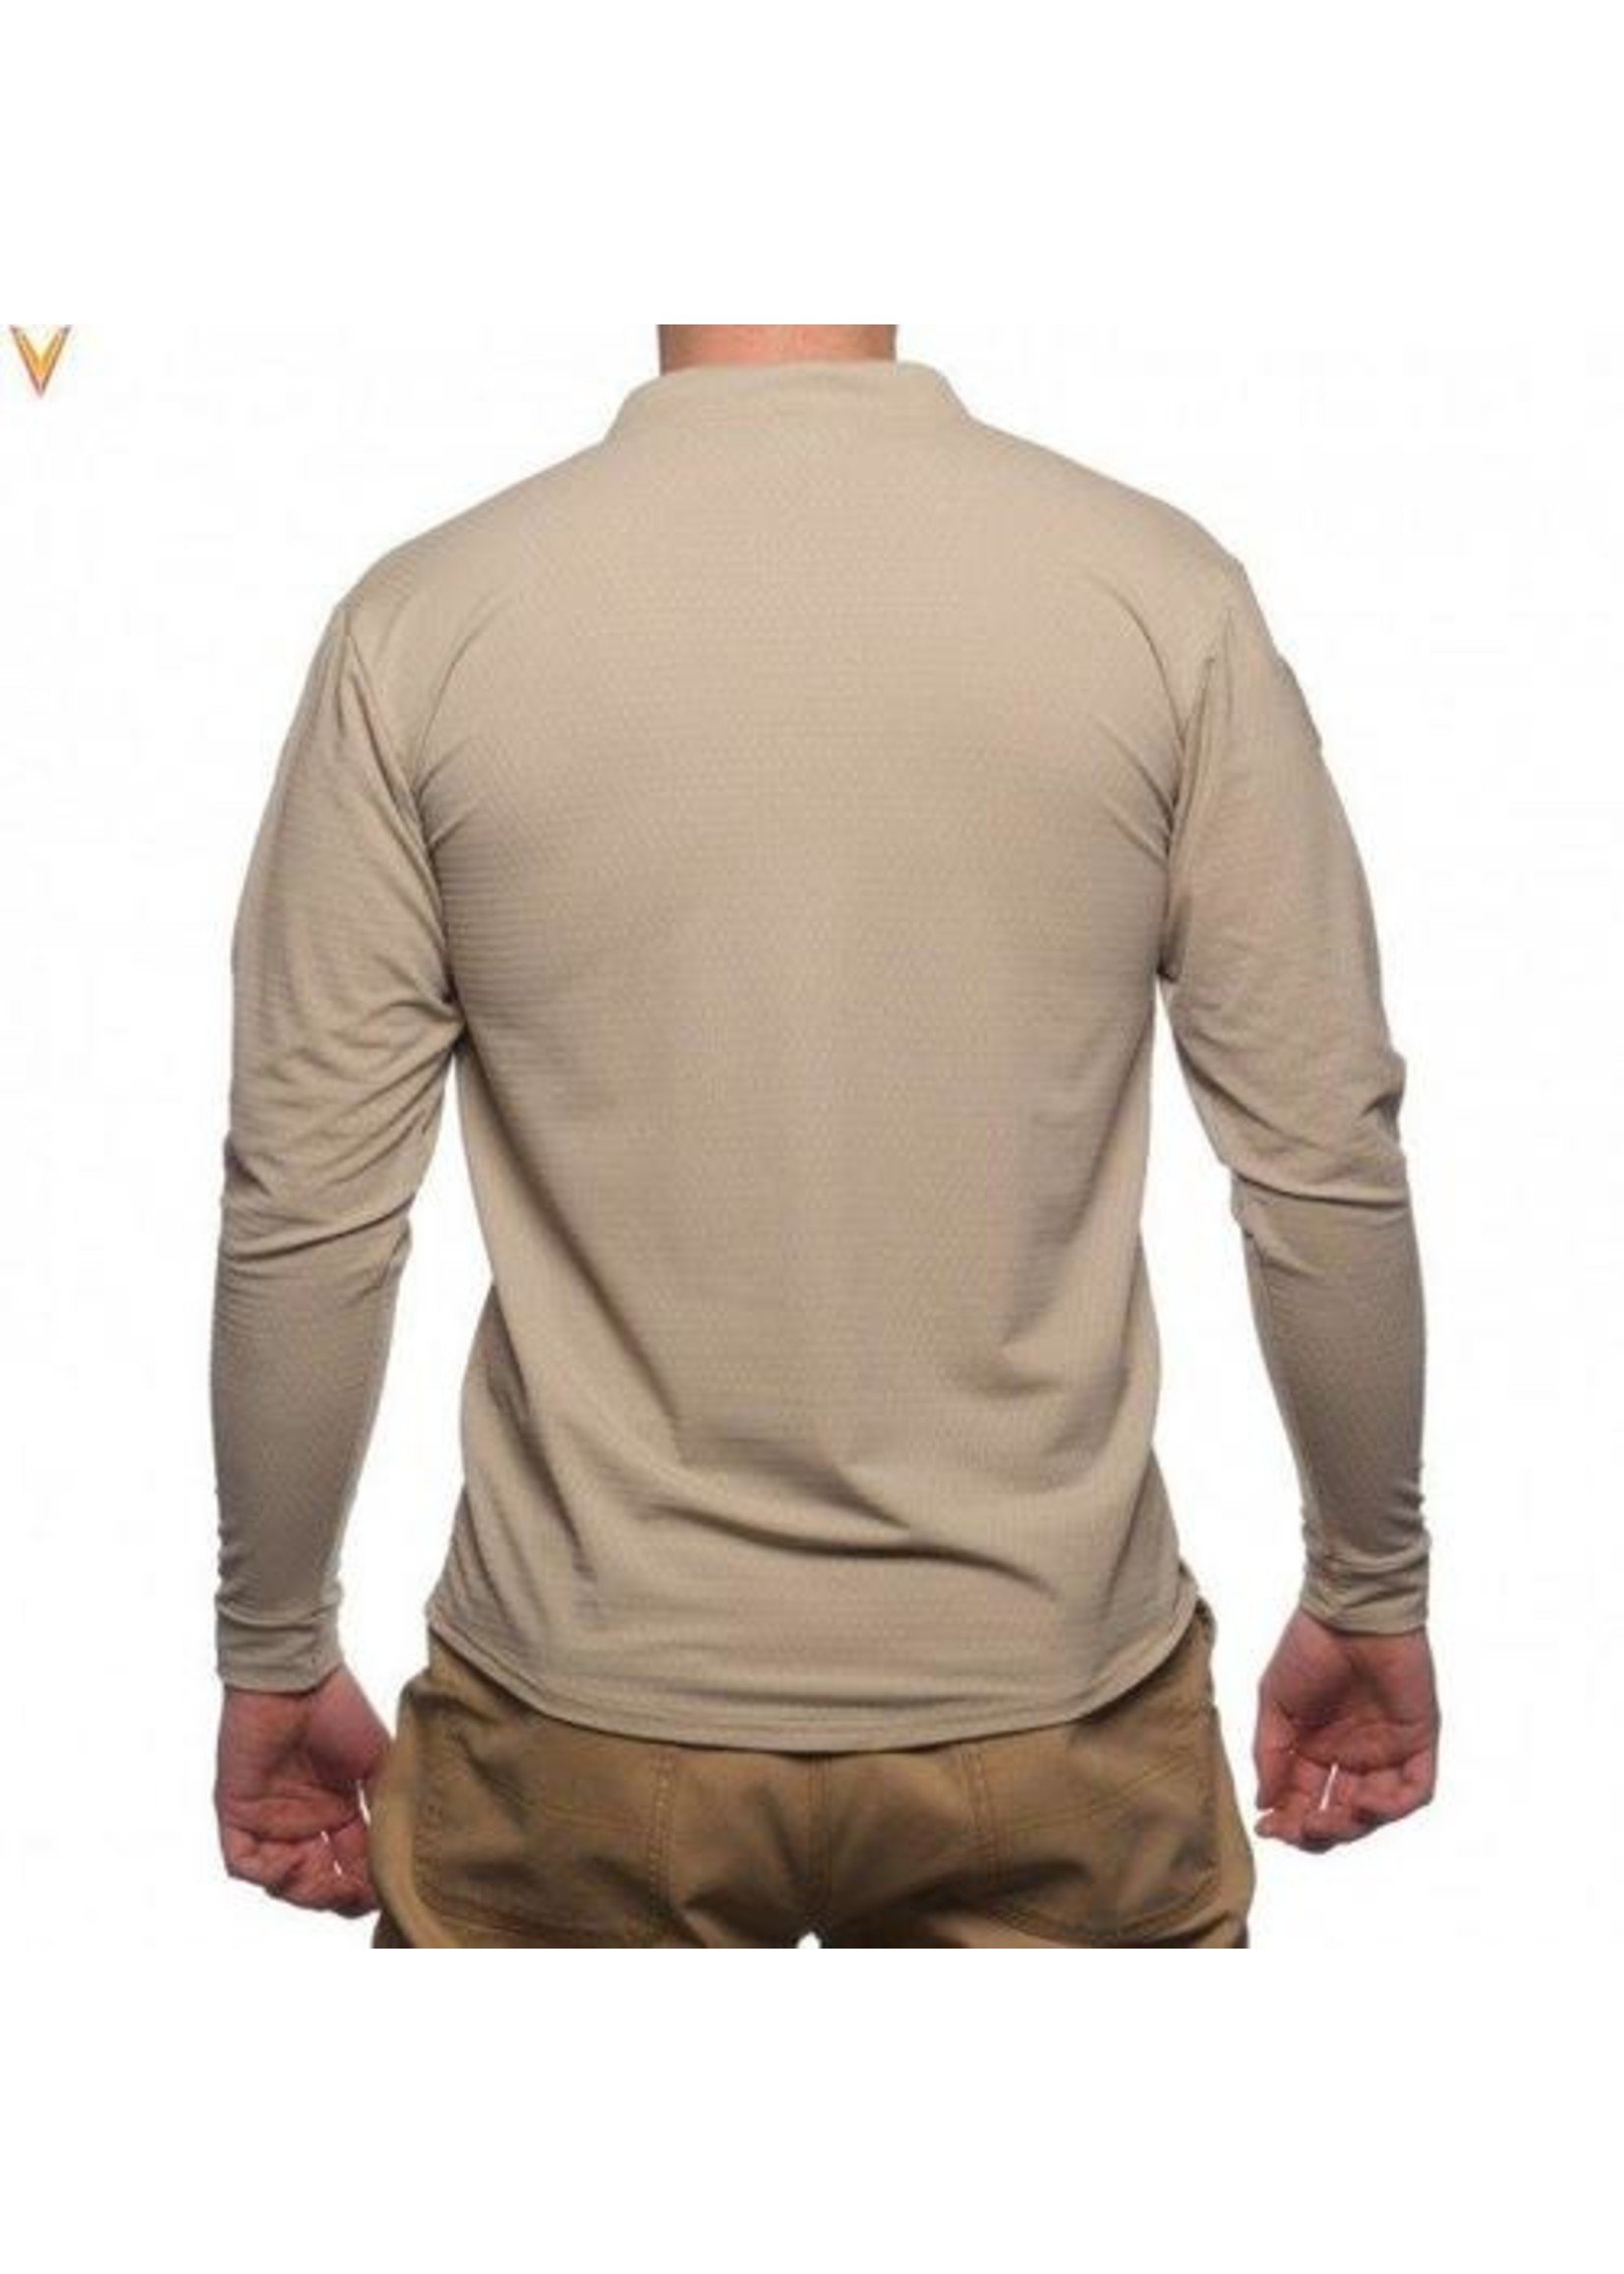 VELOCITY SYSTEMS BOSS RUGBY LONG SLEEVE SHIRT